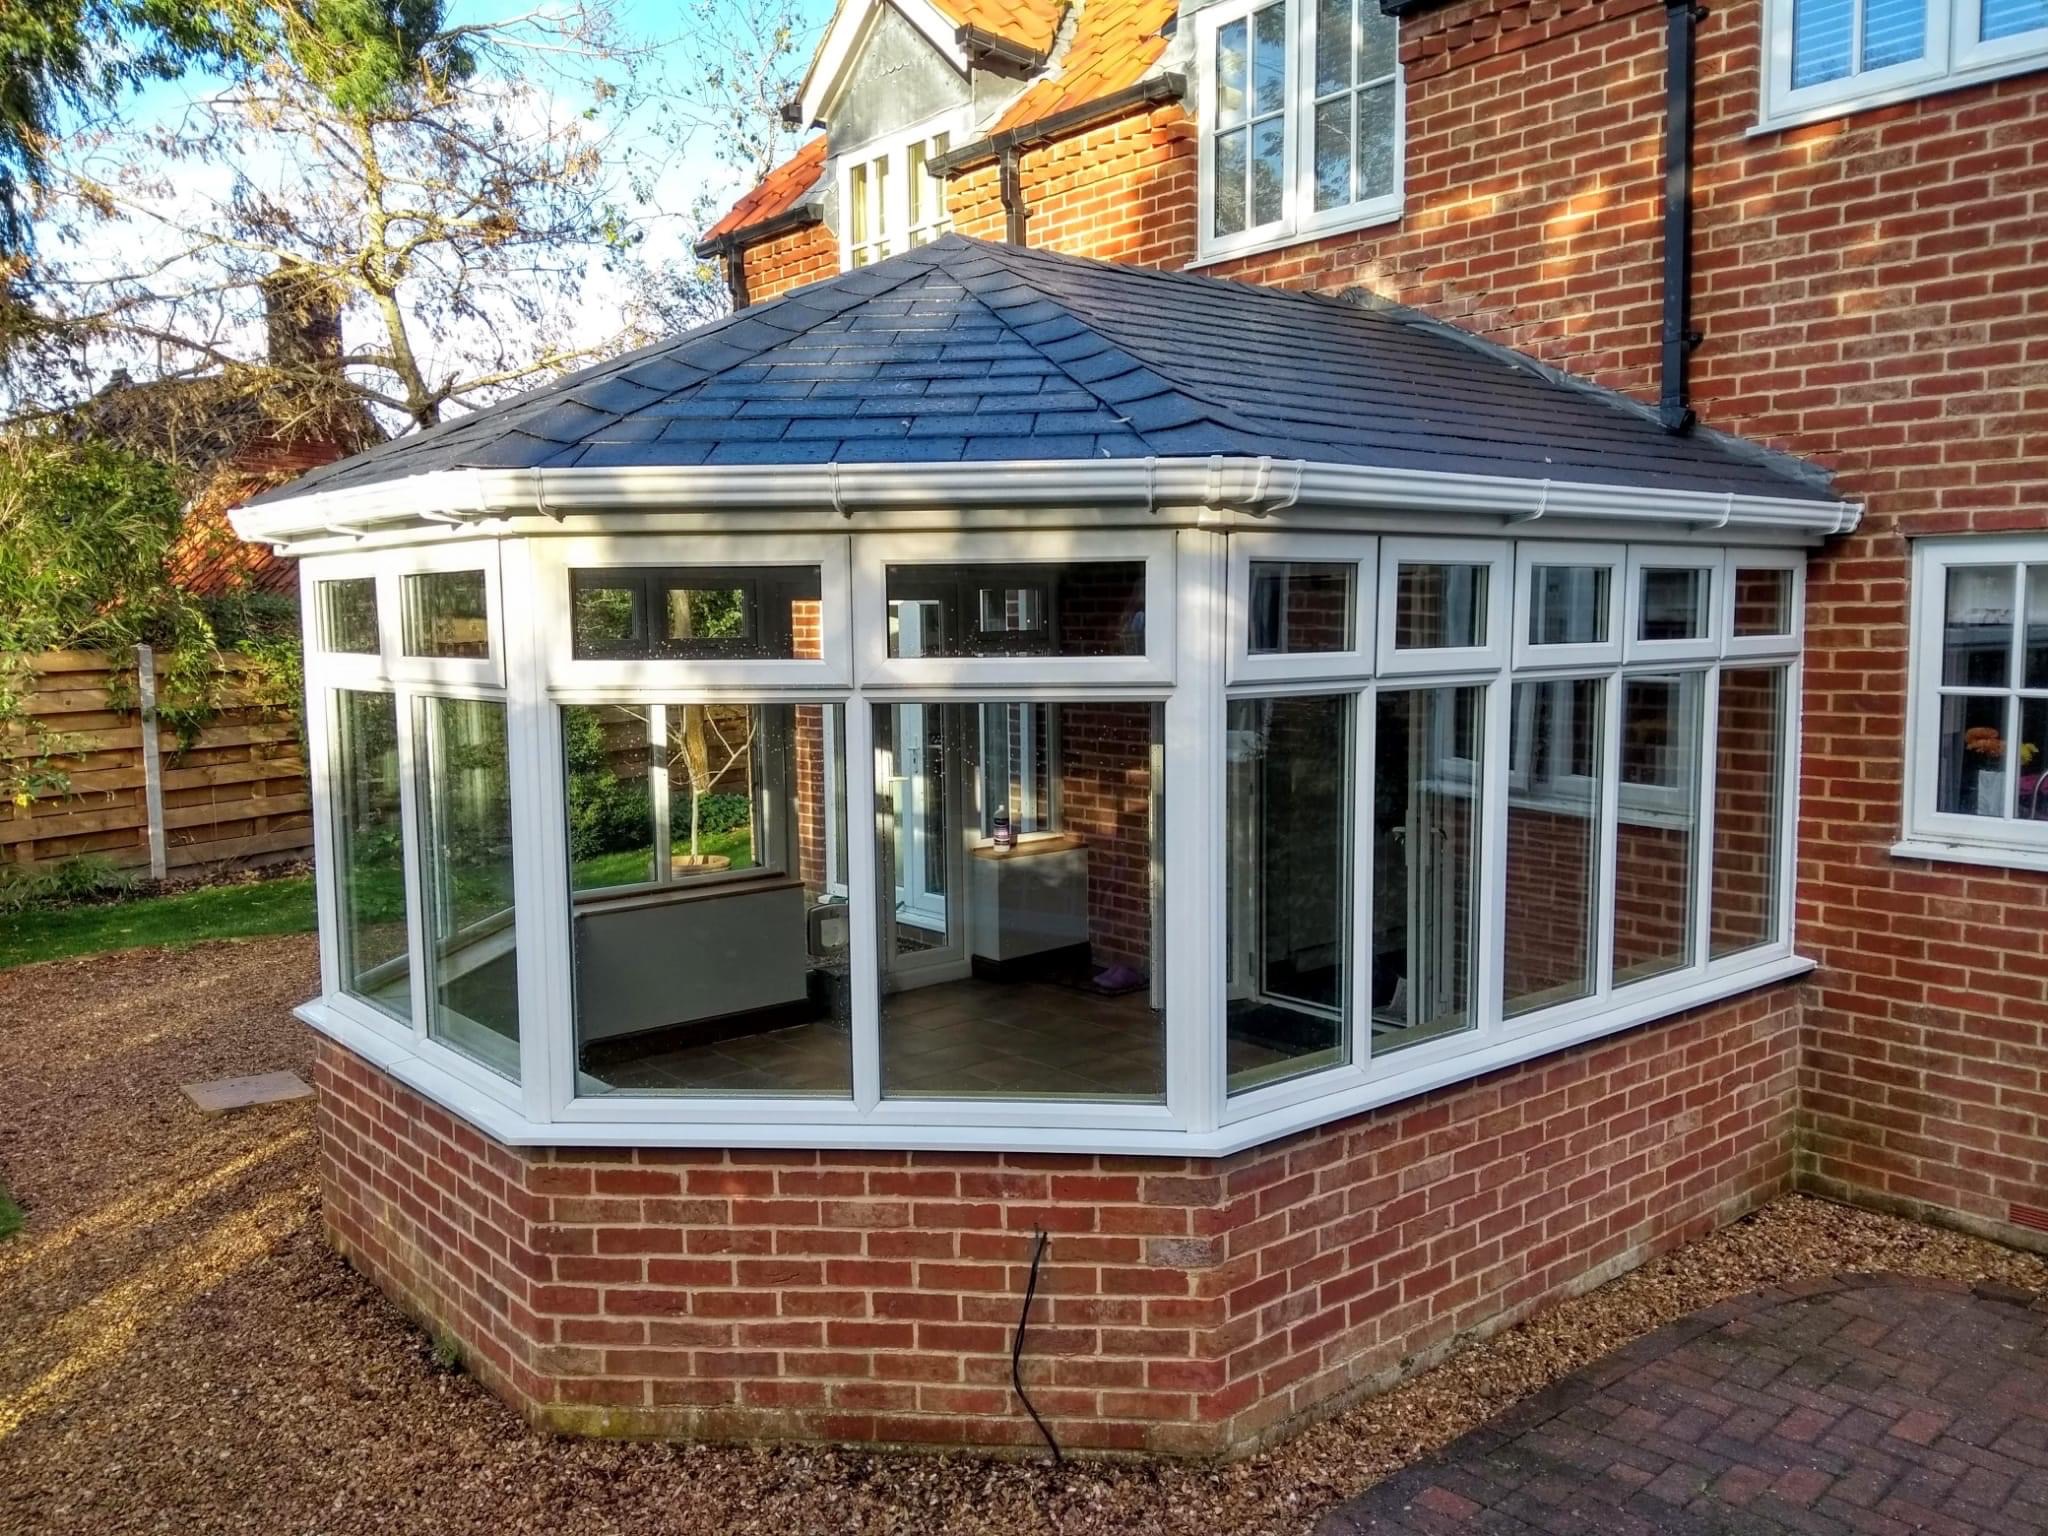 Finished Tiled conservatory with gray slate tiles